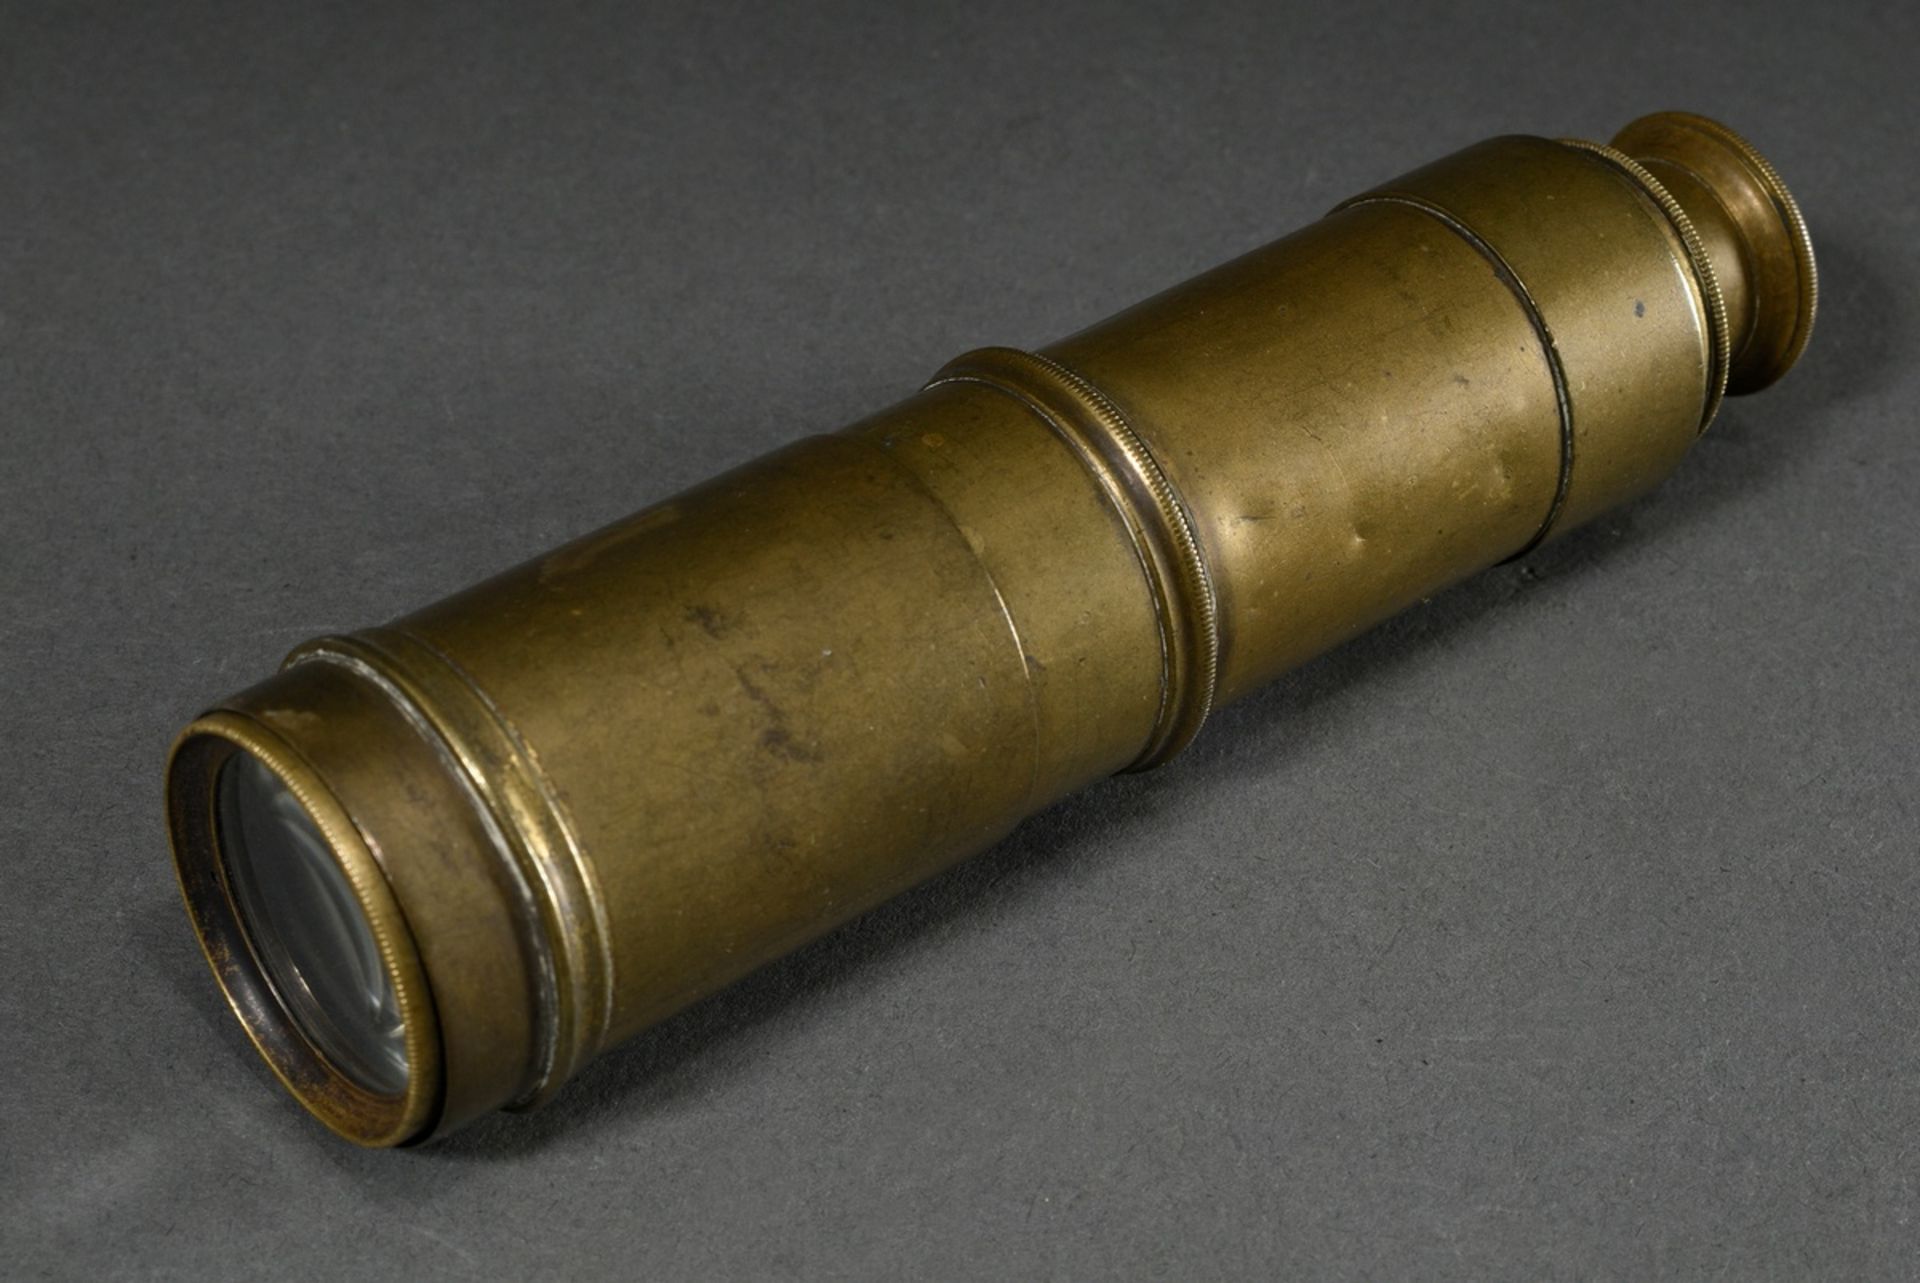 2 Various pieces 19th century: Brass telescope (l. 15-48cm, slight signs of usage) and early ambrot - Image 2 of 6